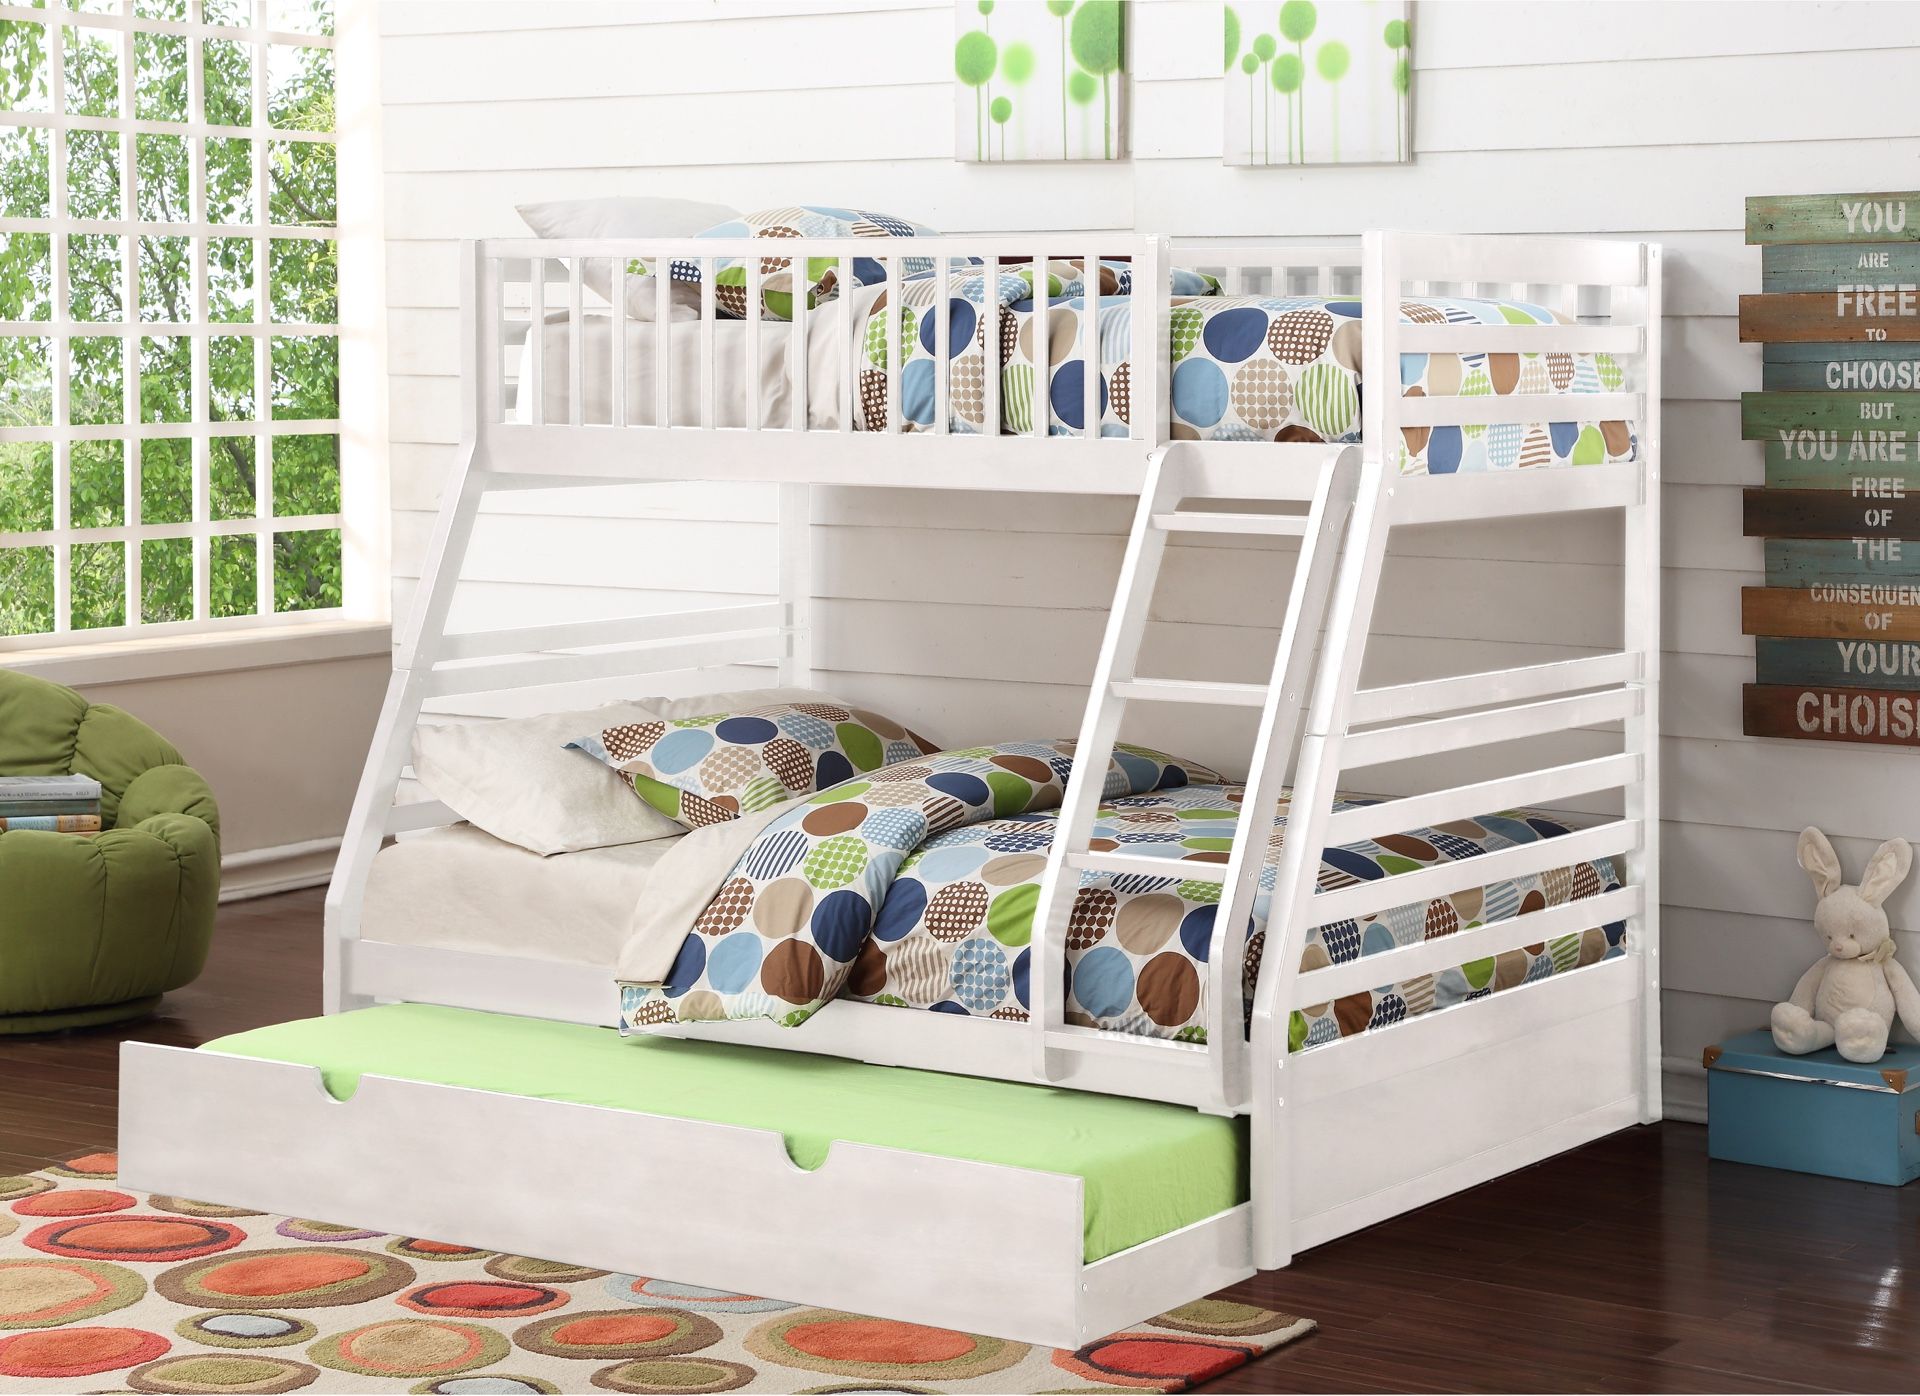 Brand new bunk bed twin over full + trundle bed Included